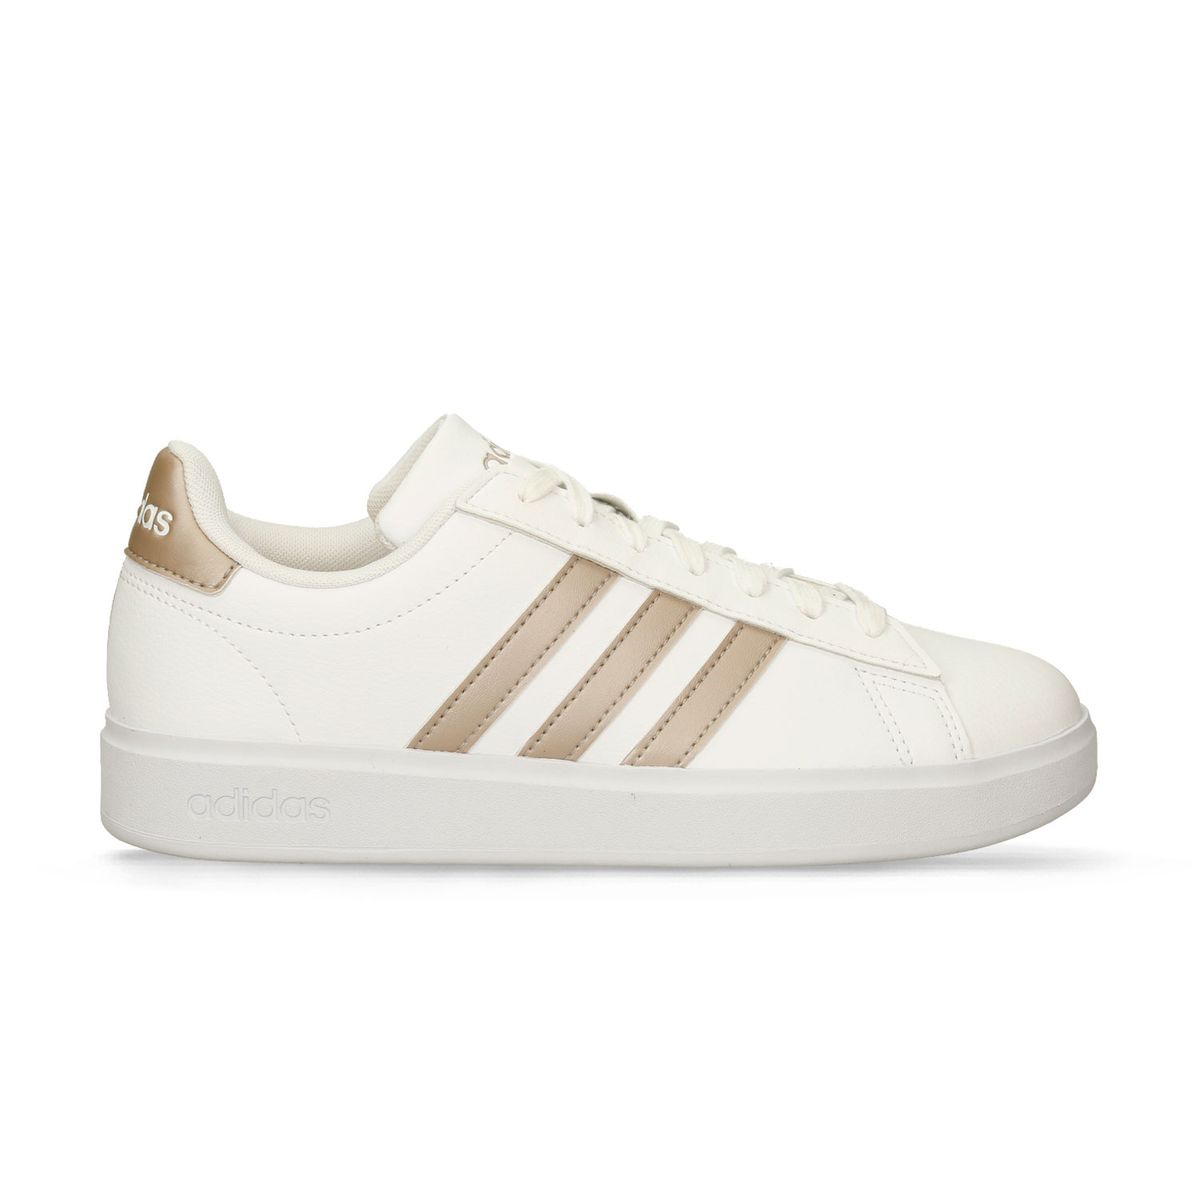 Tenis Casuales Blanco Adidas Grand Court 2.0 Mujer